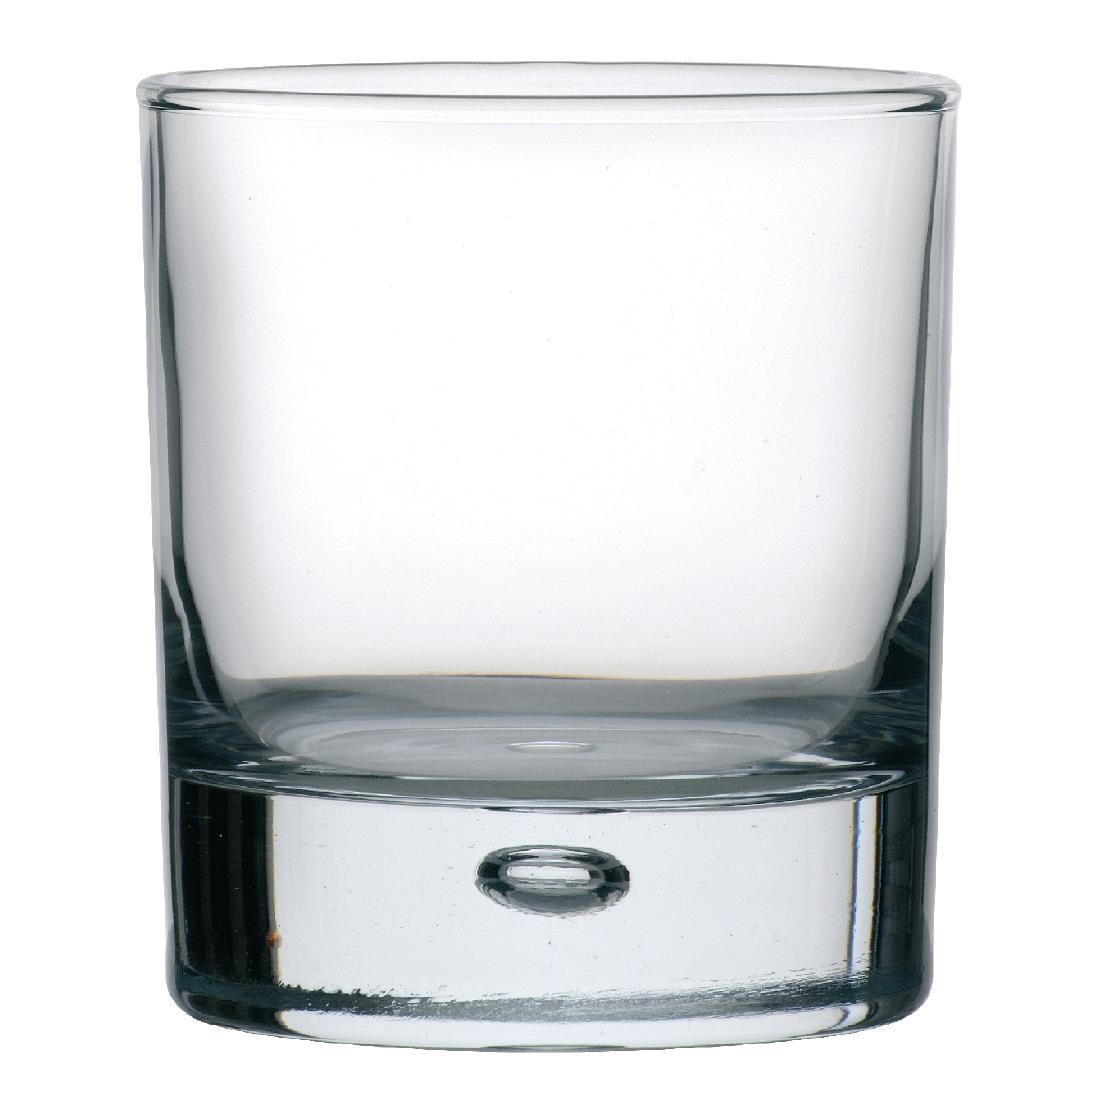 Utopia Centra Rocks Glass 330ml (Pack of 6) - F855  - 1